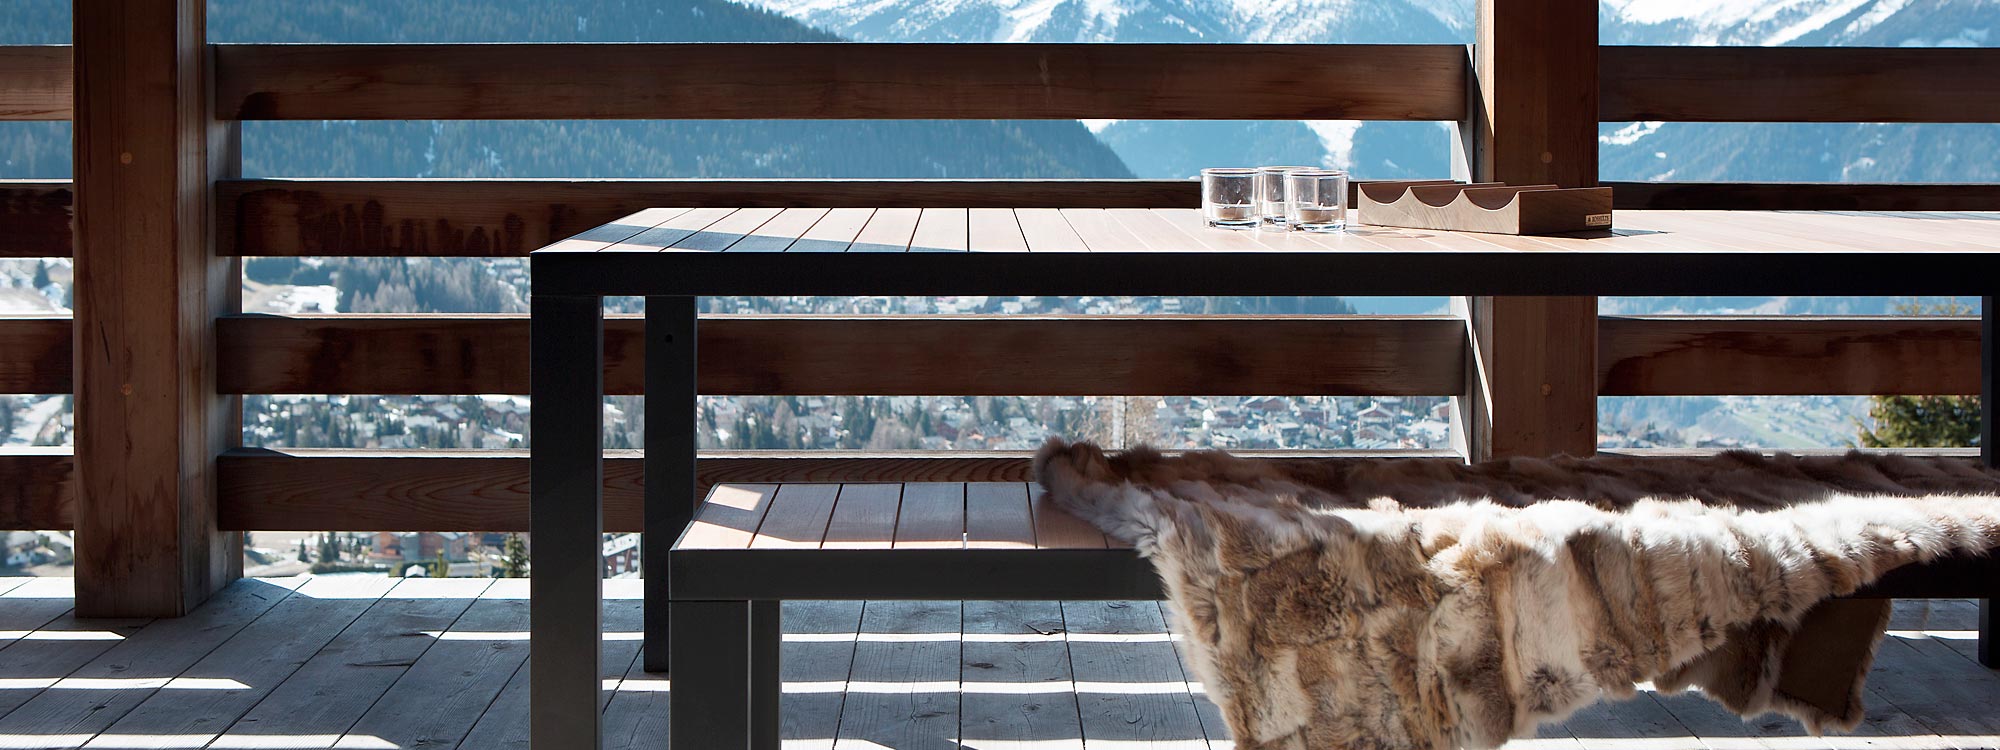 Image of Roshults garden dinner table and bench seat with fur throw, shown on chilly balcony with snow-capped mountains in the background